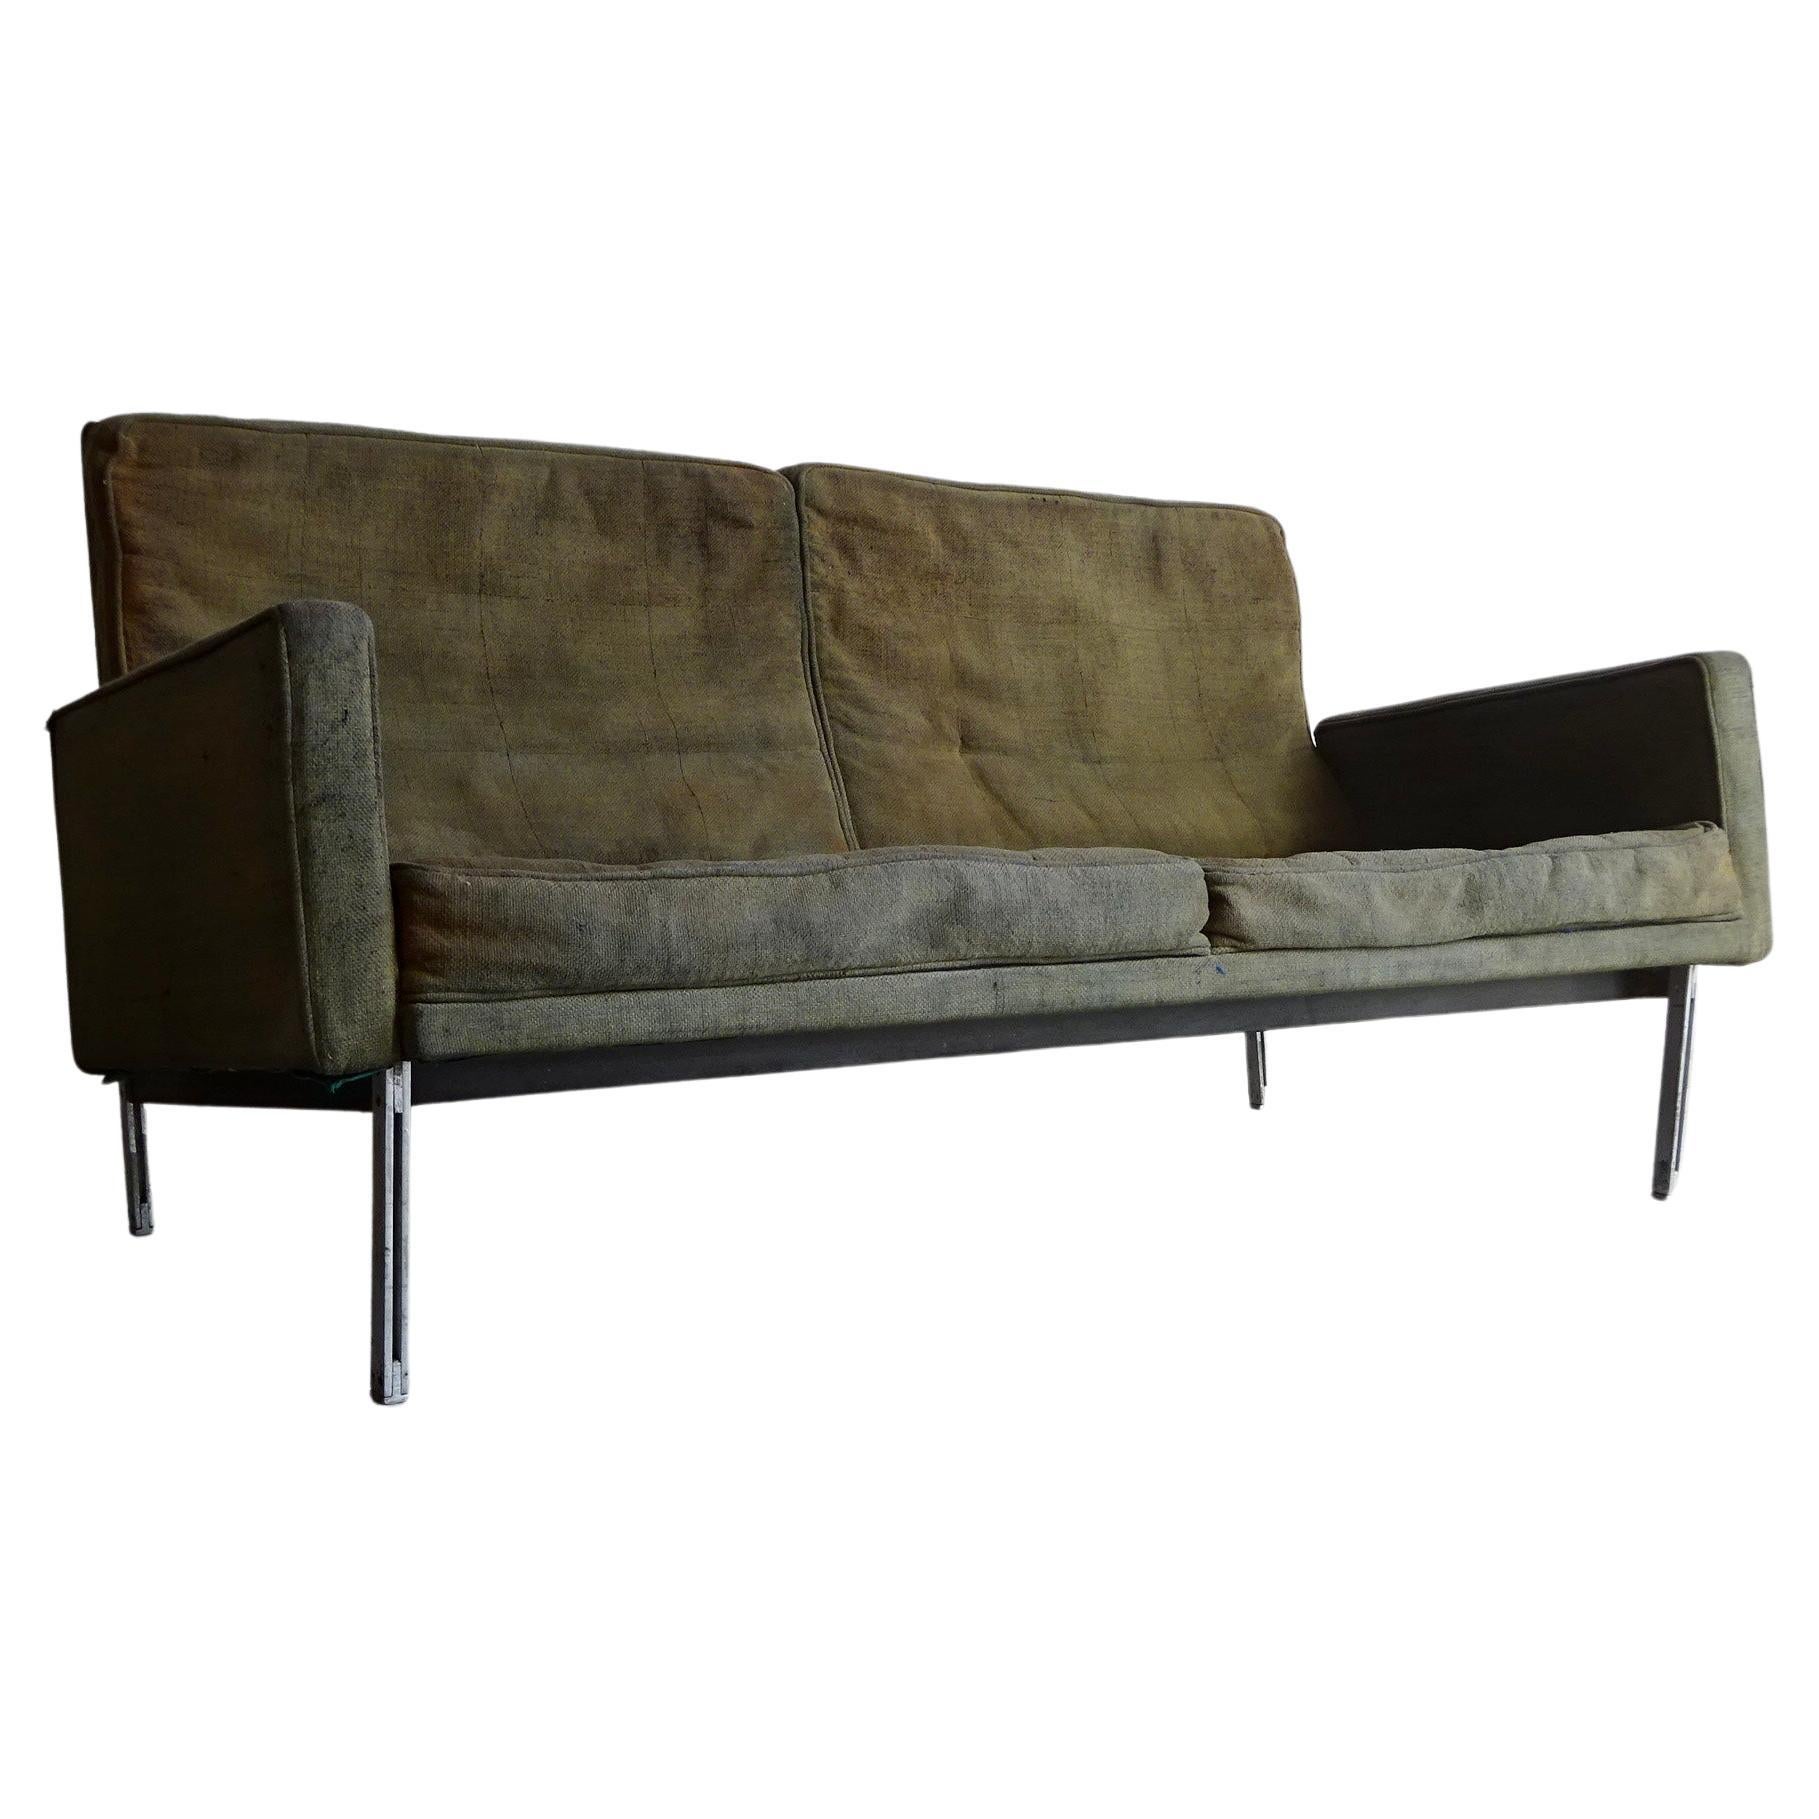 Parallel Bar Sofa, Model 57, by Florence Knol, USA, 1960s.